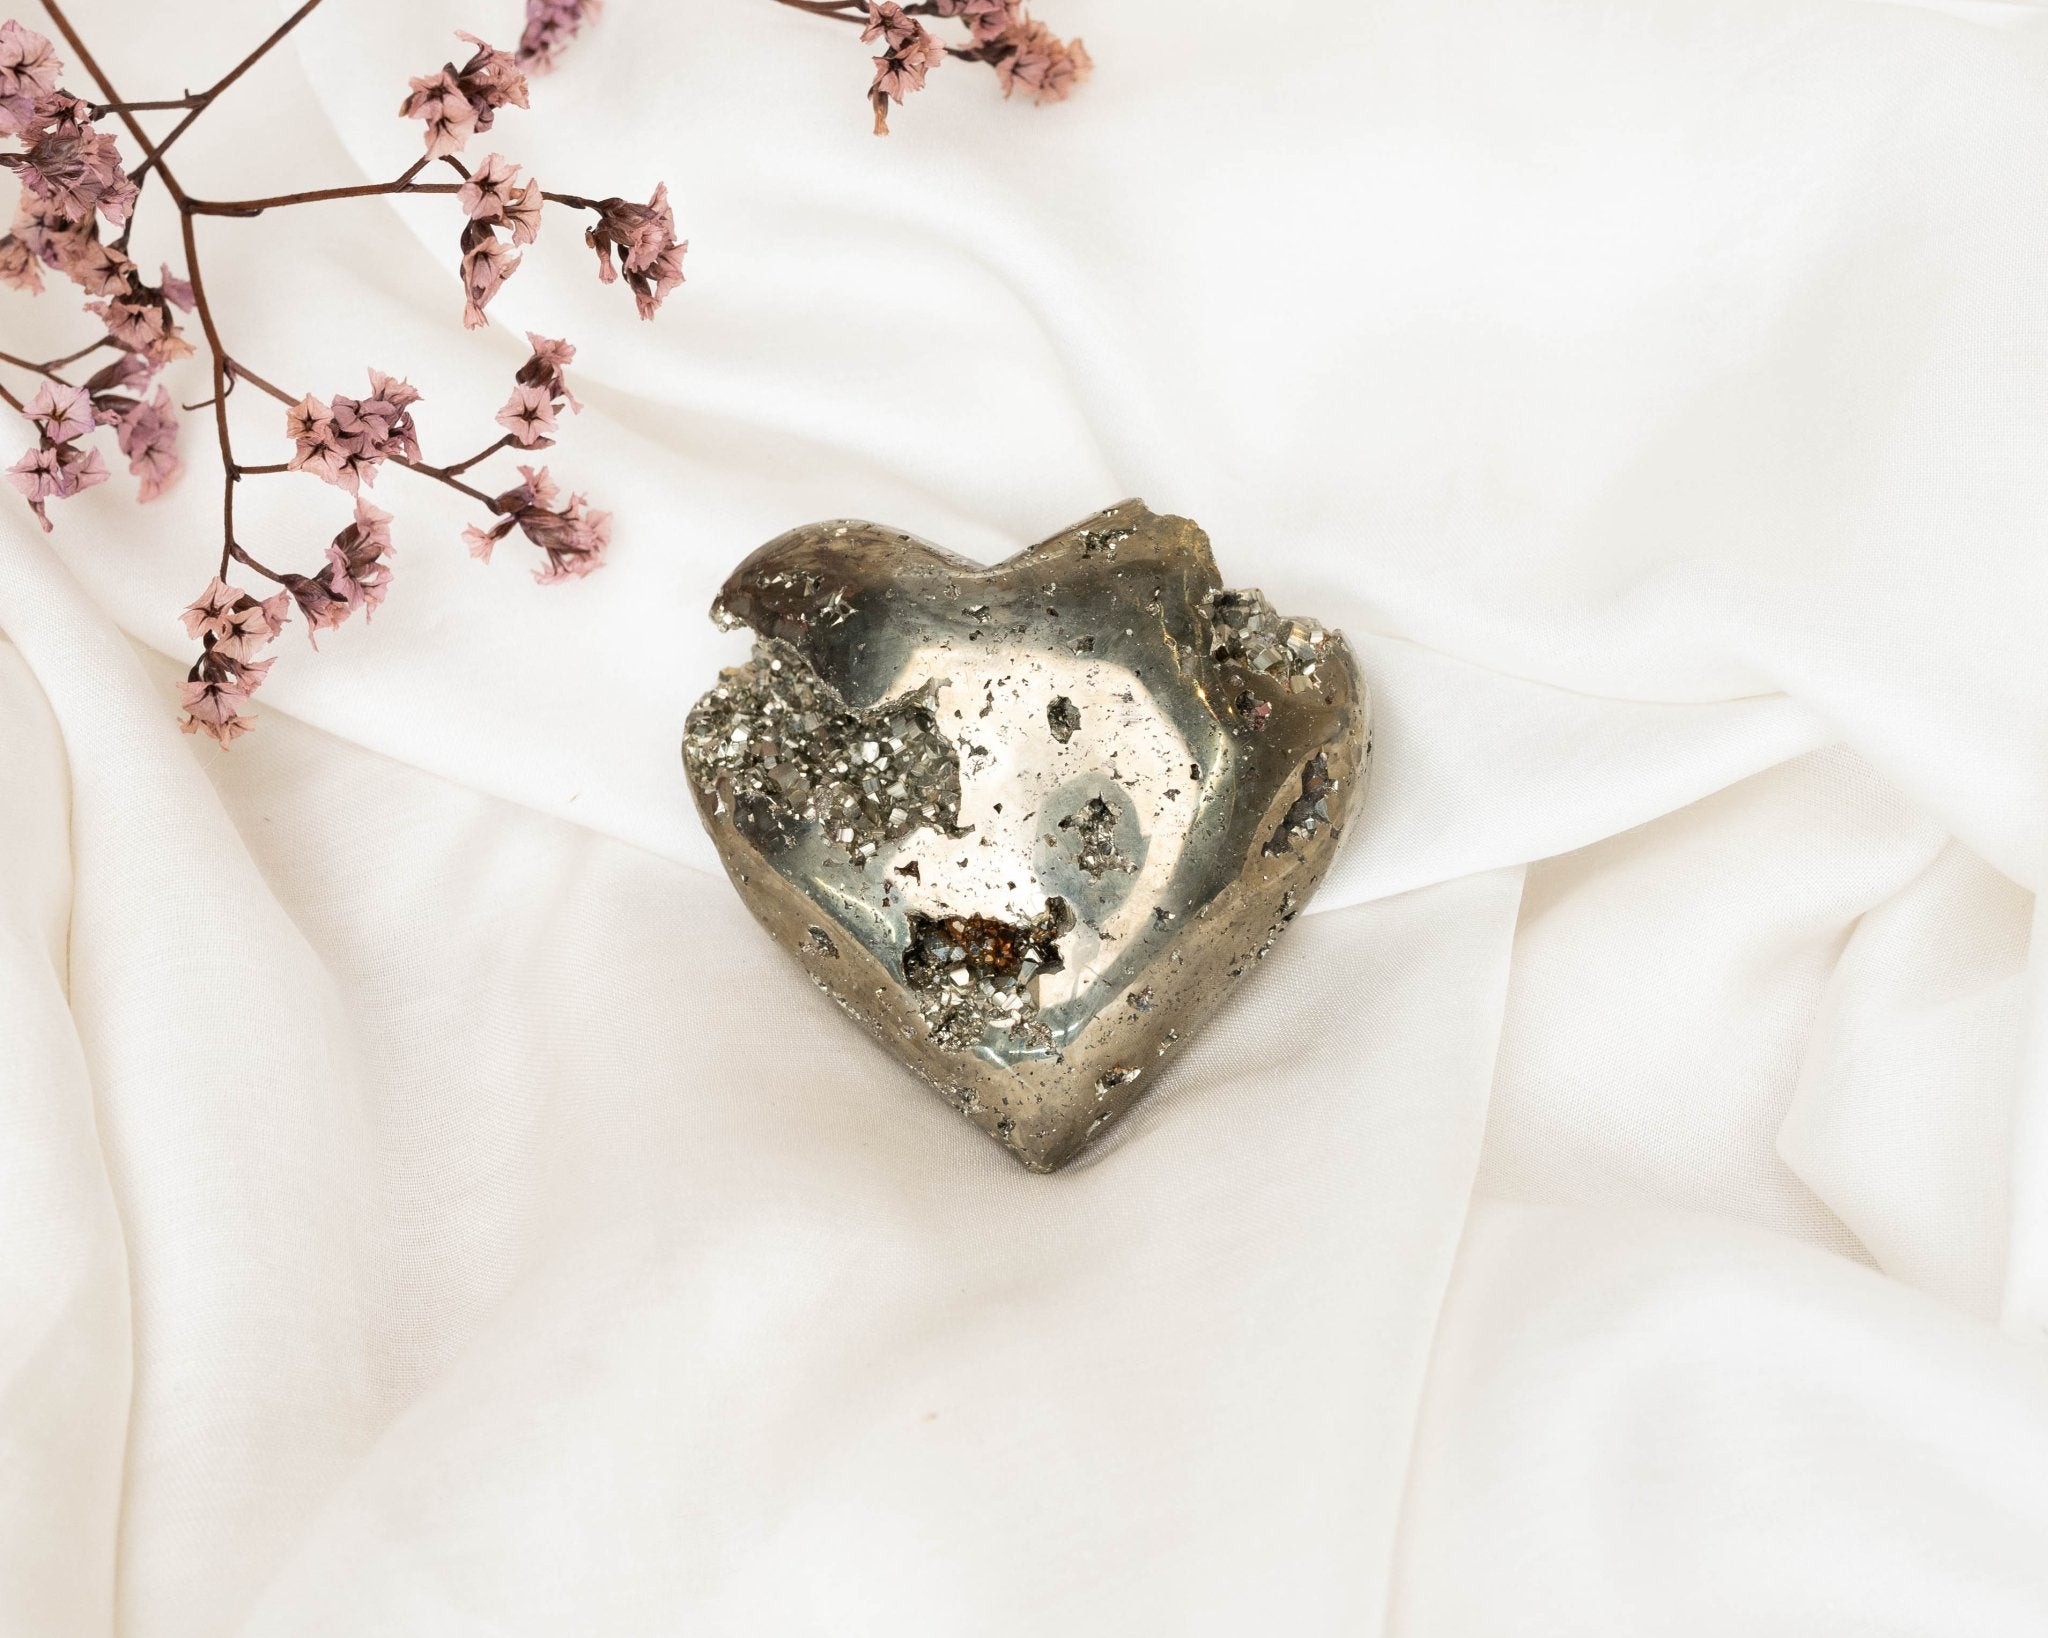 Iron Pyrite Heart 177.4g - Bodh Gem and Crystals